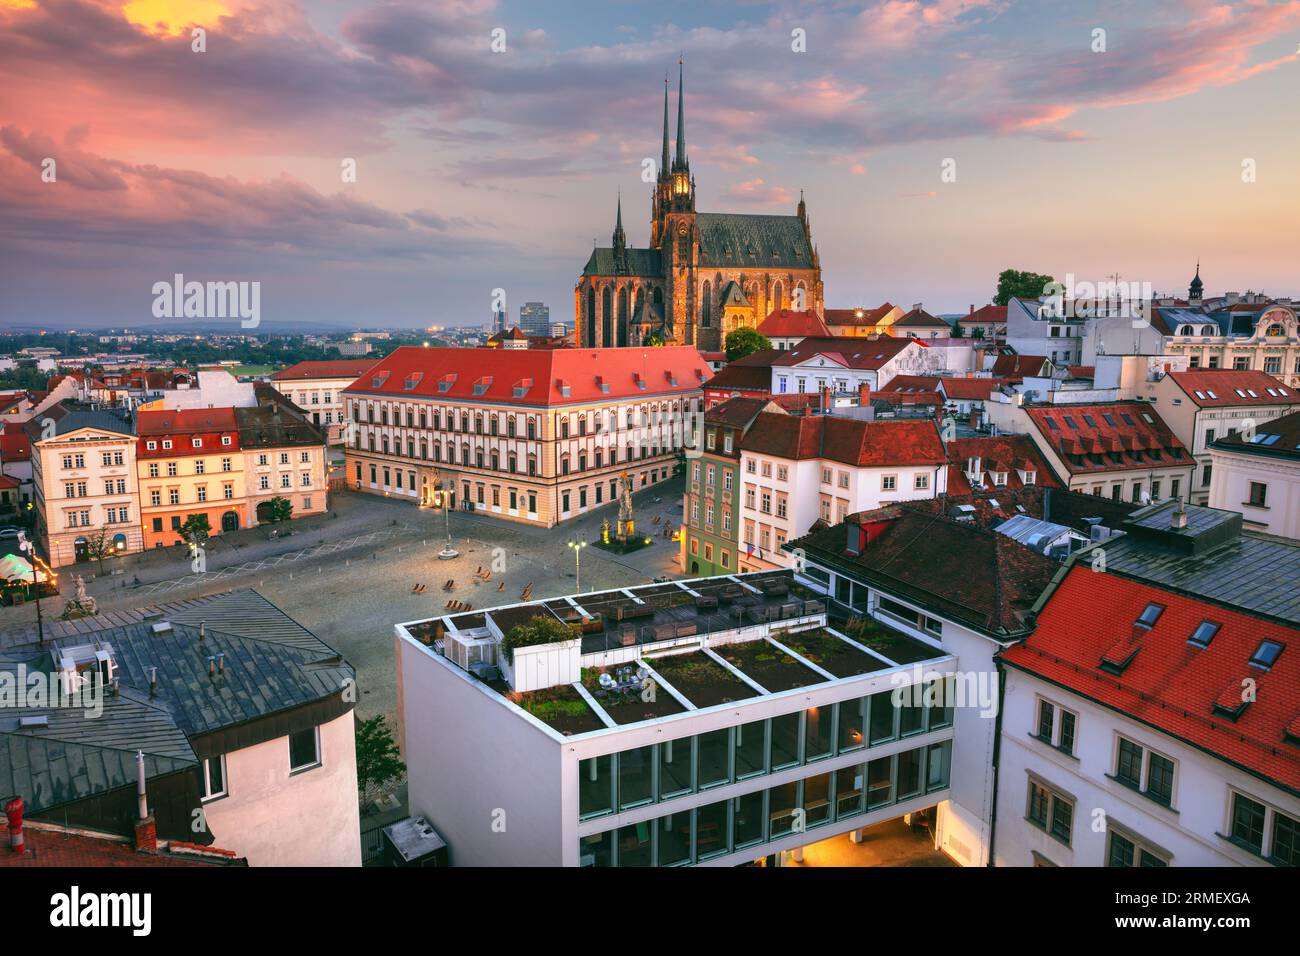 Brno, Czech Republic. Aerial cityscape image of Brno, second largest city in Czech Republic with the Cathedral of St. Peter and Paul at summer sunset. Stock Photo